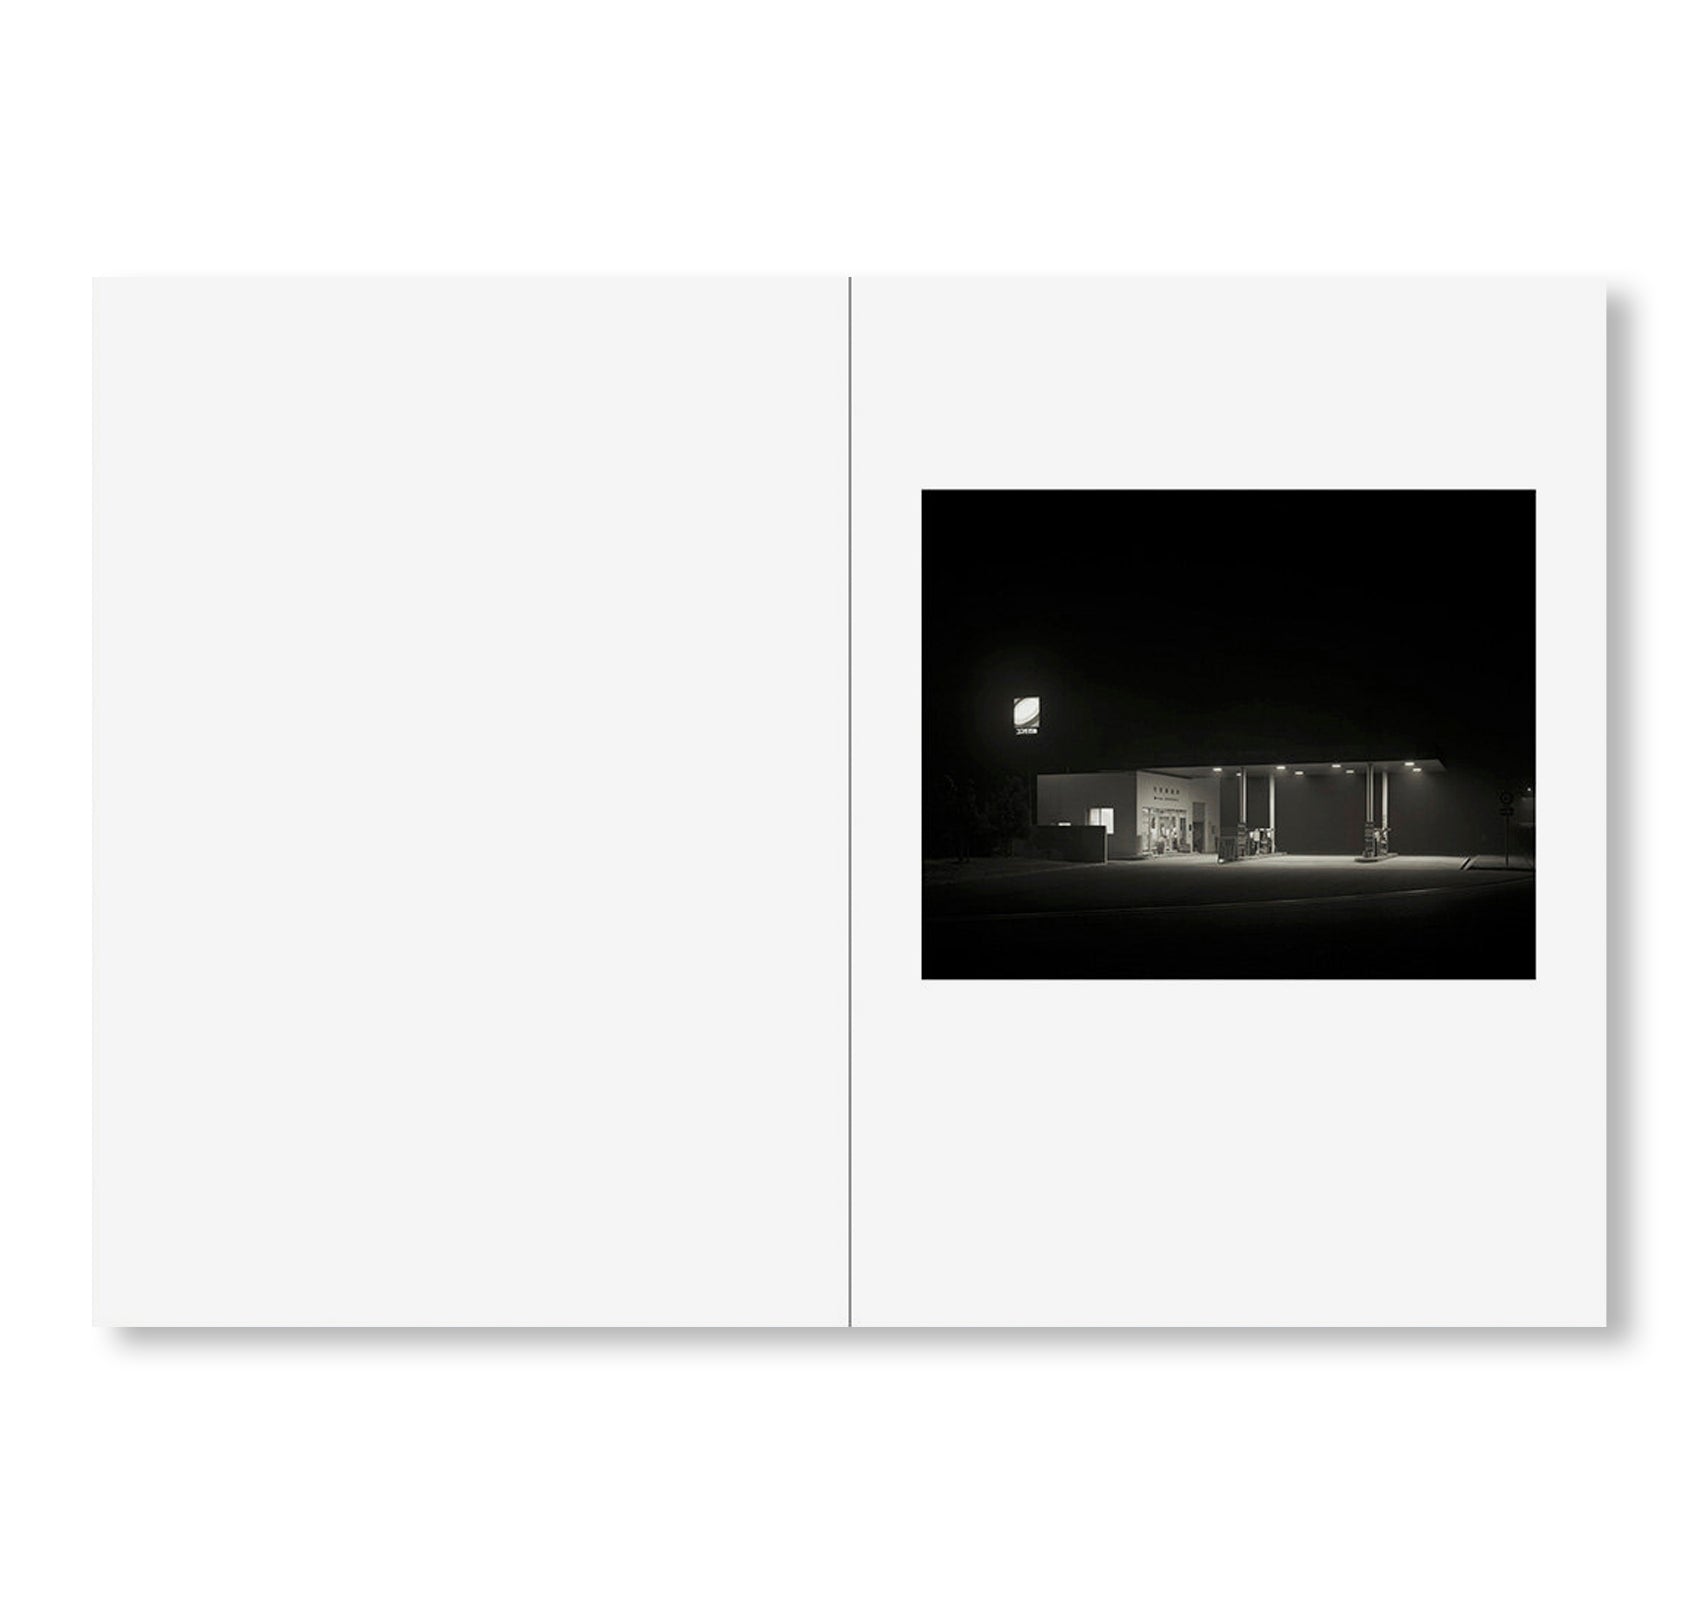 ONE PICTURE BOOK TWO #13: GAS STATIONS by Toshio Shibata